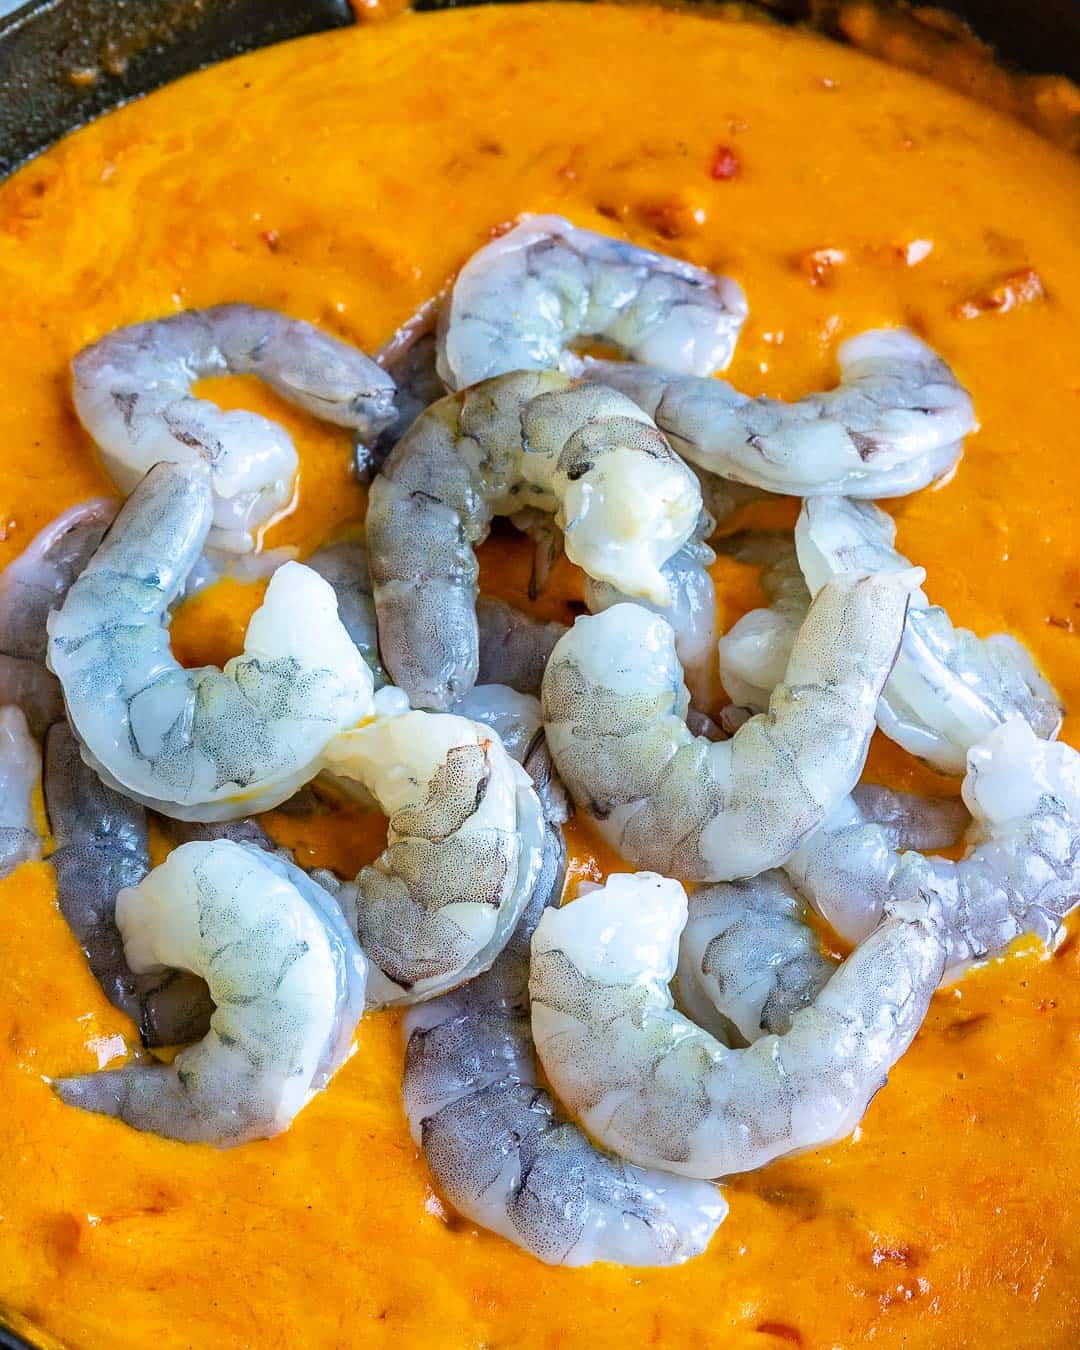 Shrimp peeled and deveined in curry sauce